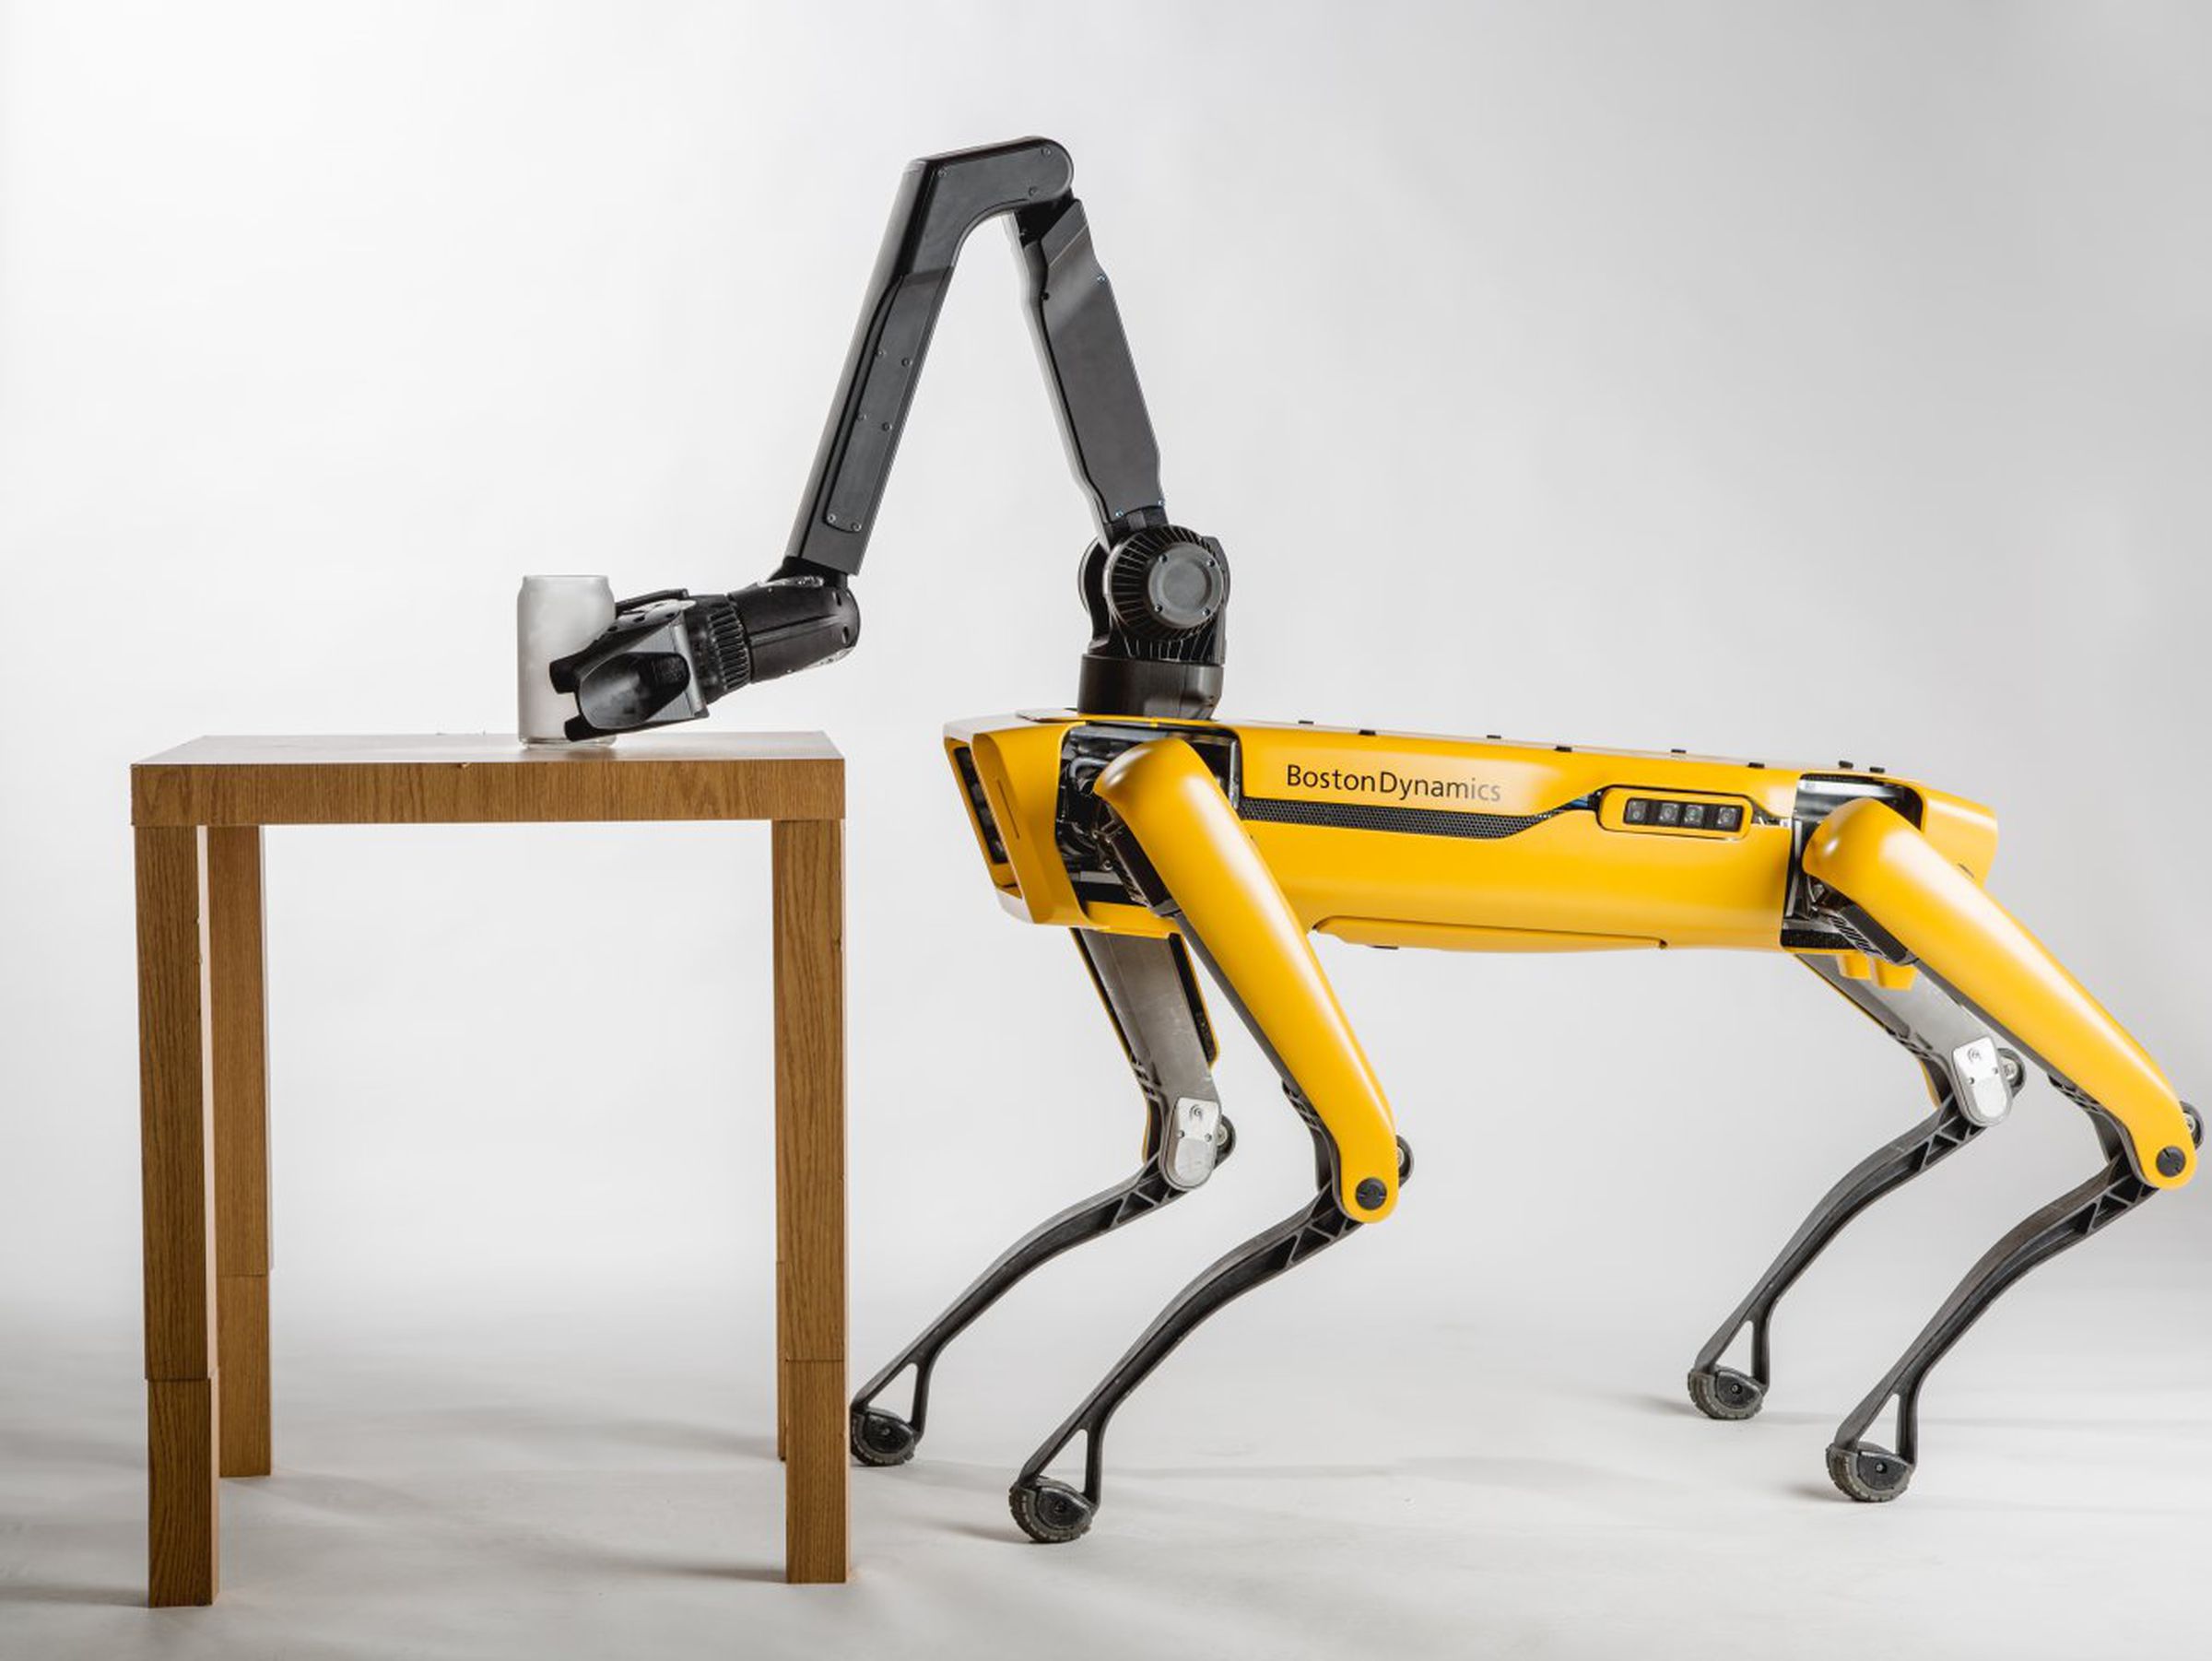 Spot’s appeal lies in its modularity. Customers can add on different modifications, like the grabbing arm above. 